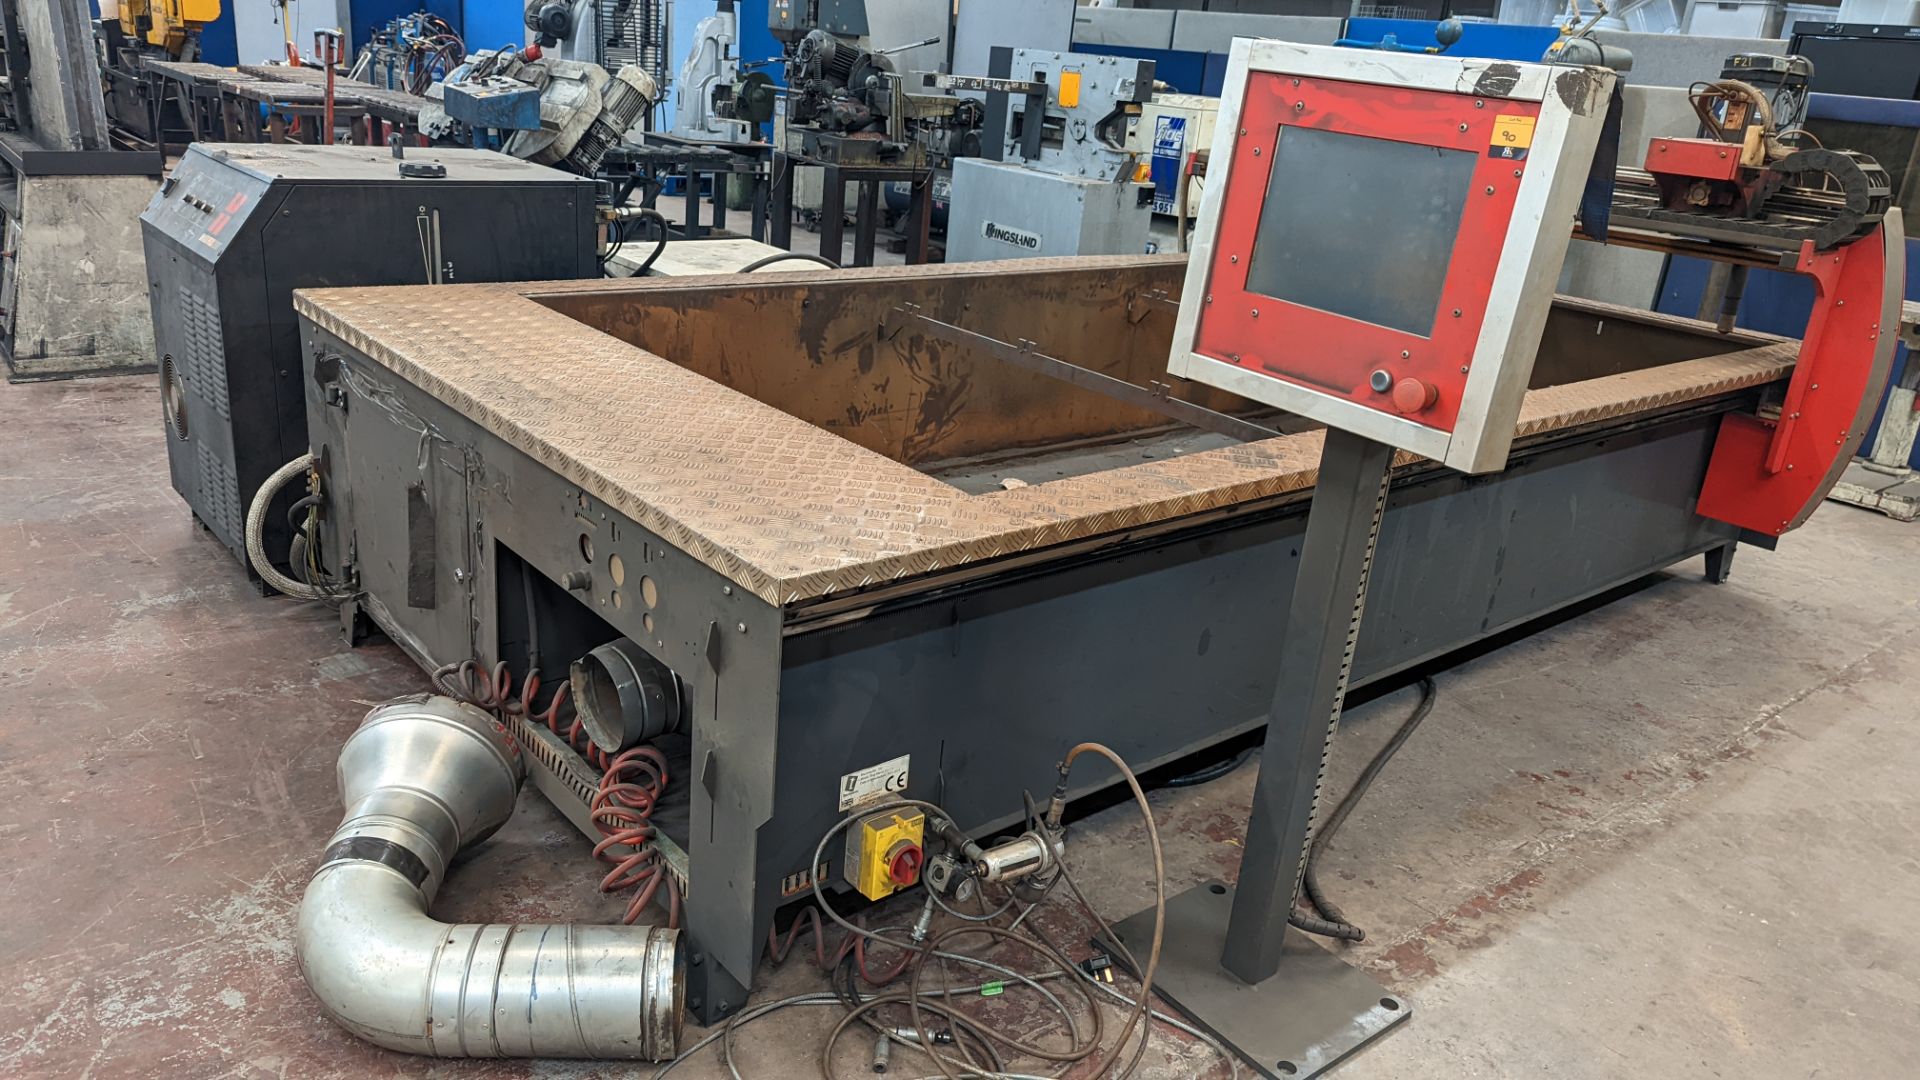 Plasma cutting system comprising Hypertherm Maxpro 200, Techserv Blue Marlin 3 x 1.5 table, machine - Image 5 of 27